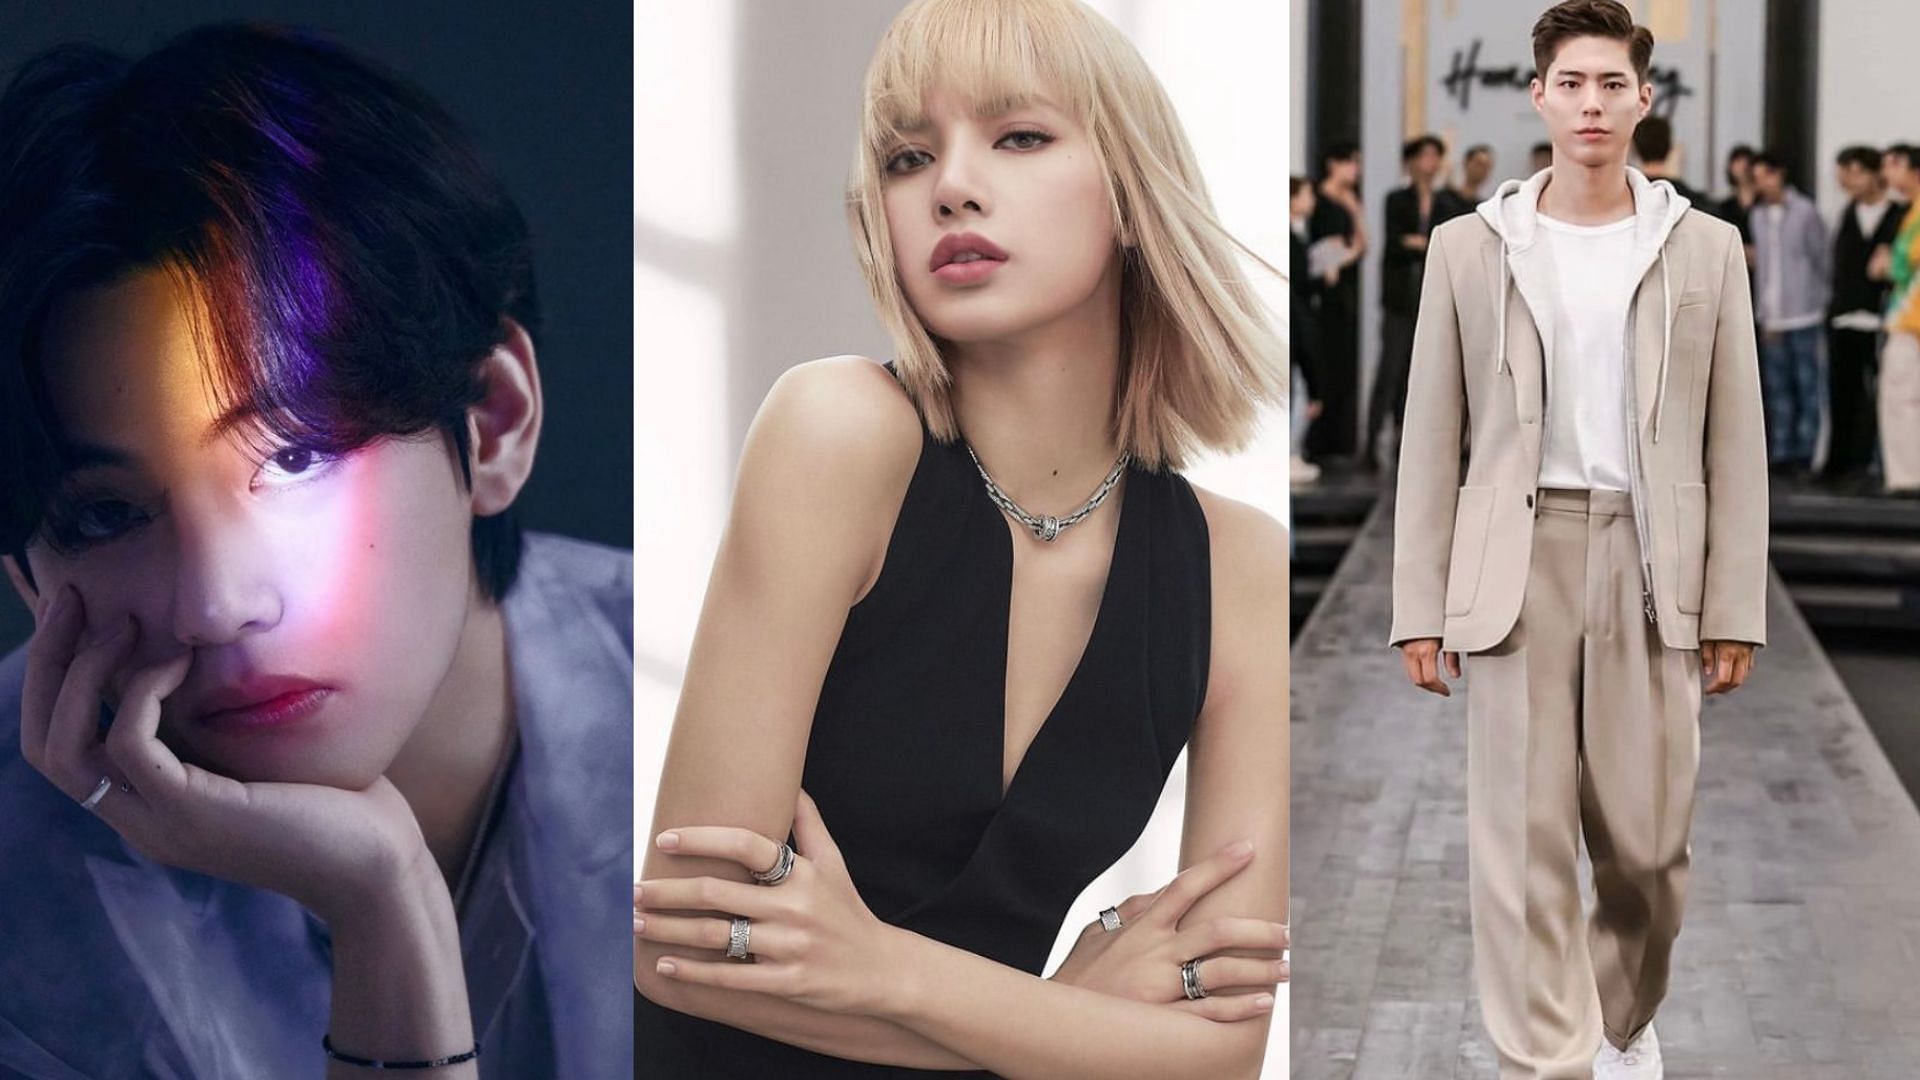 BTS' V hangs out with Lisa, shares selfies with Park Bo-gum in stylish  Céline suit. ARMY say 'Perfection is Taehyung